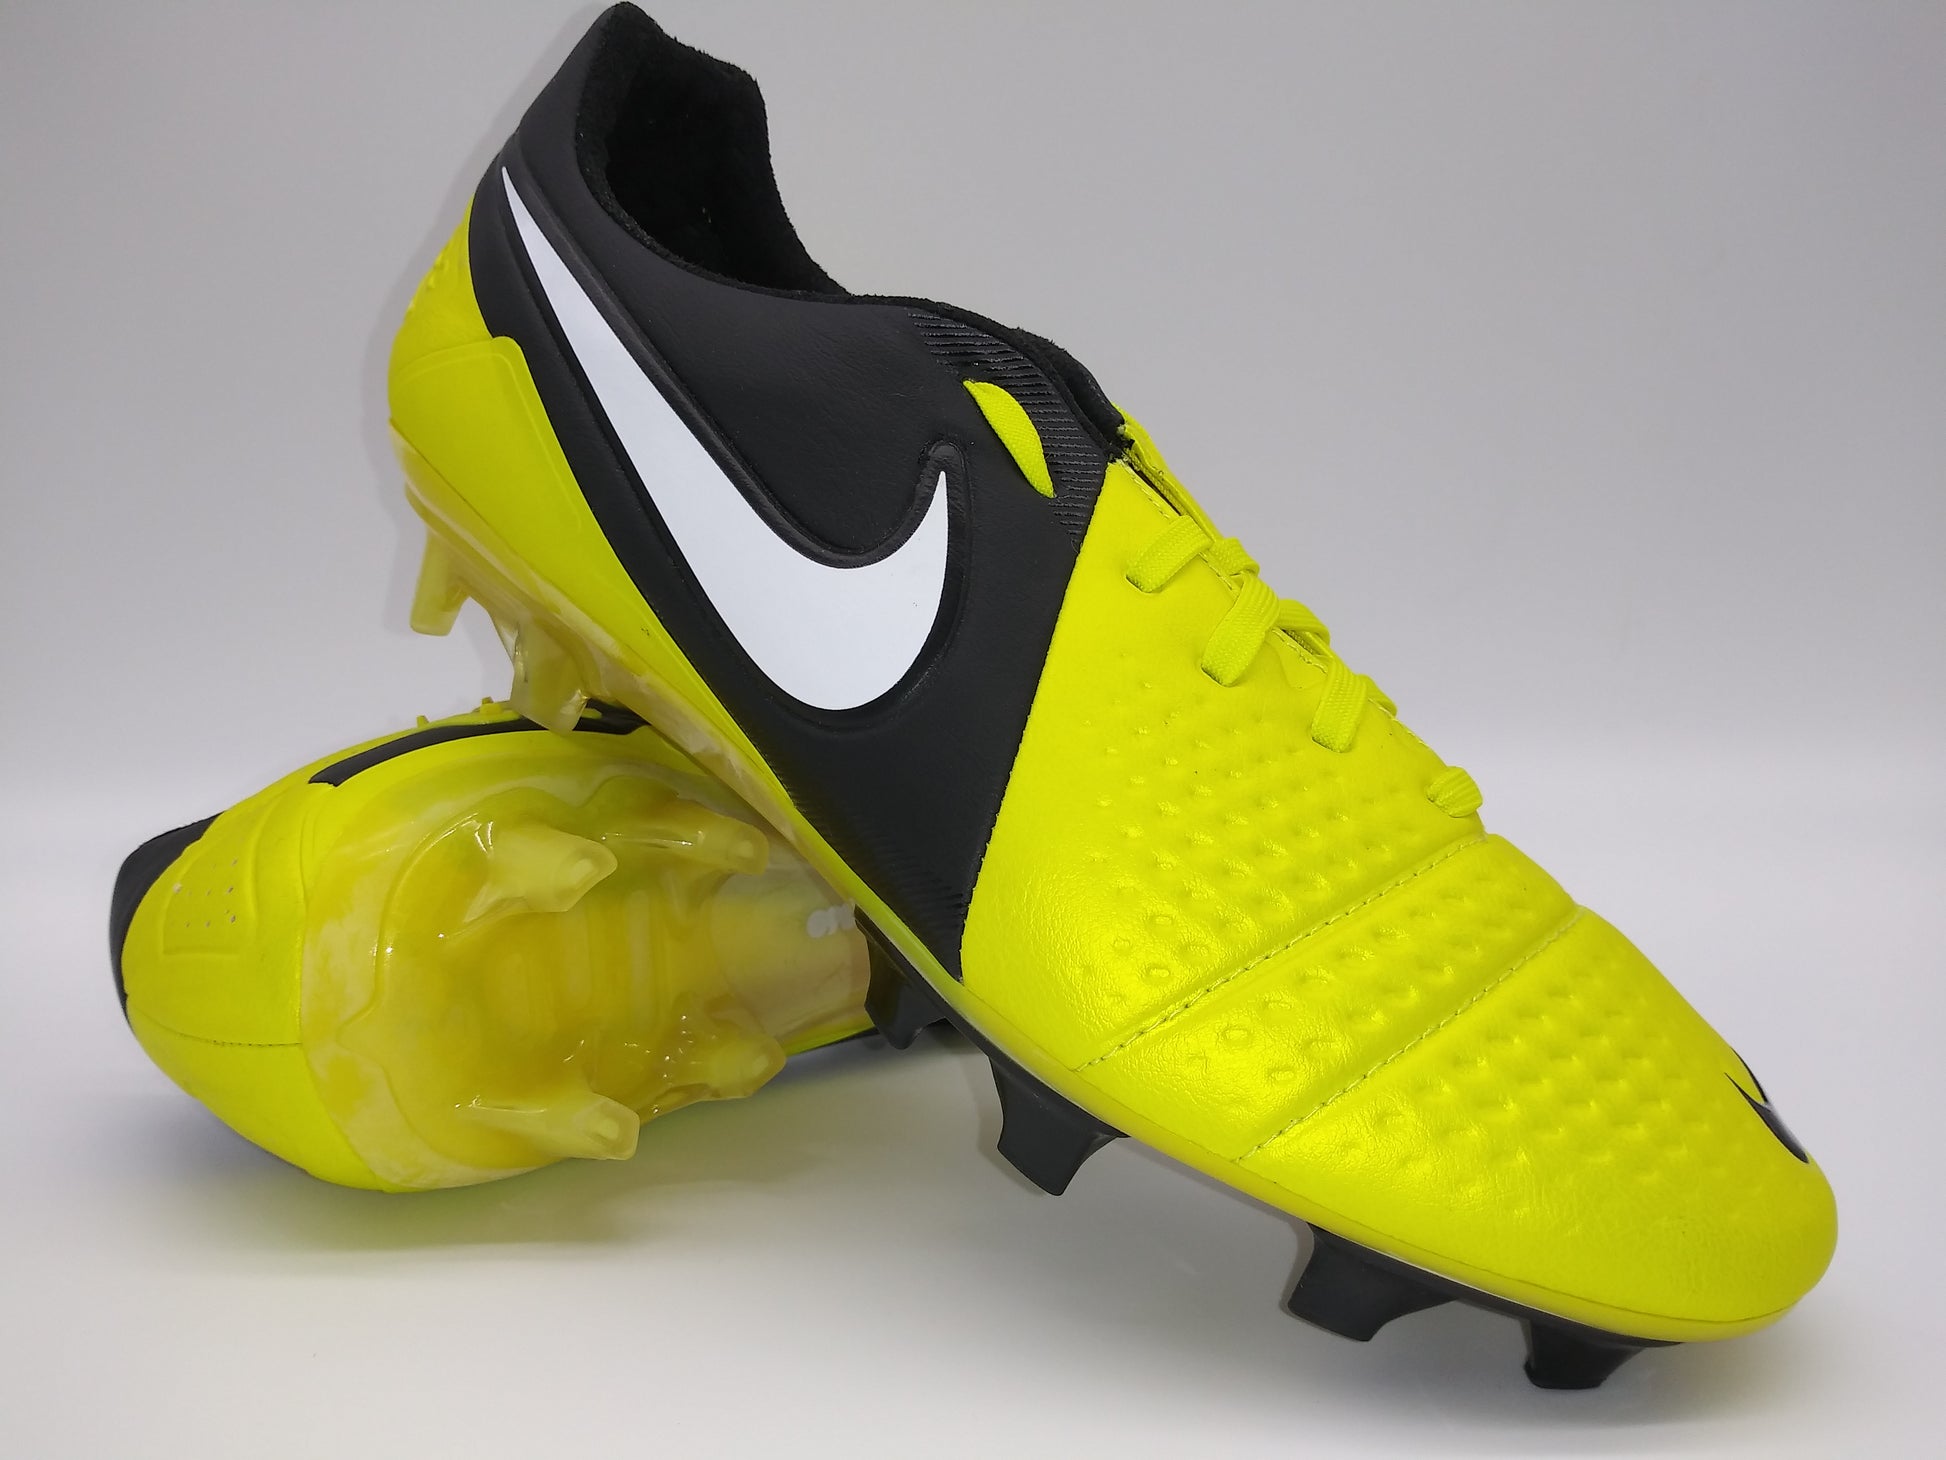 Stand Out on the Field with Nike Yellow and Black Shoes